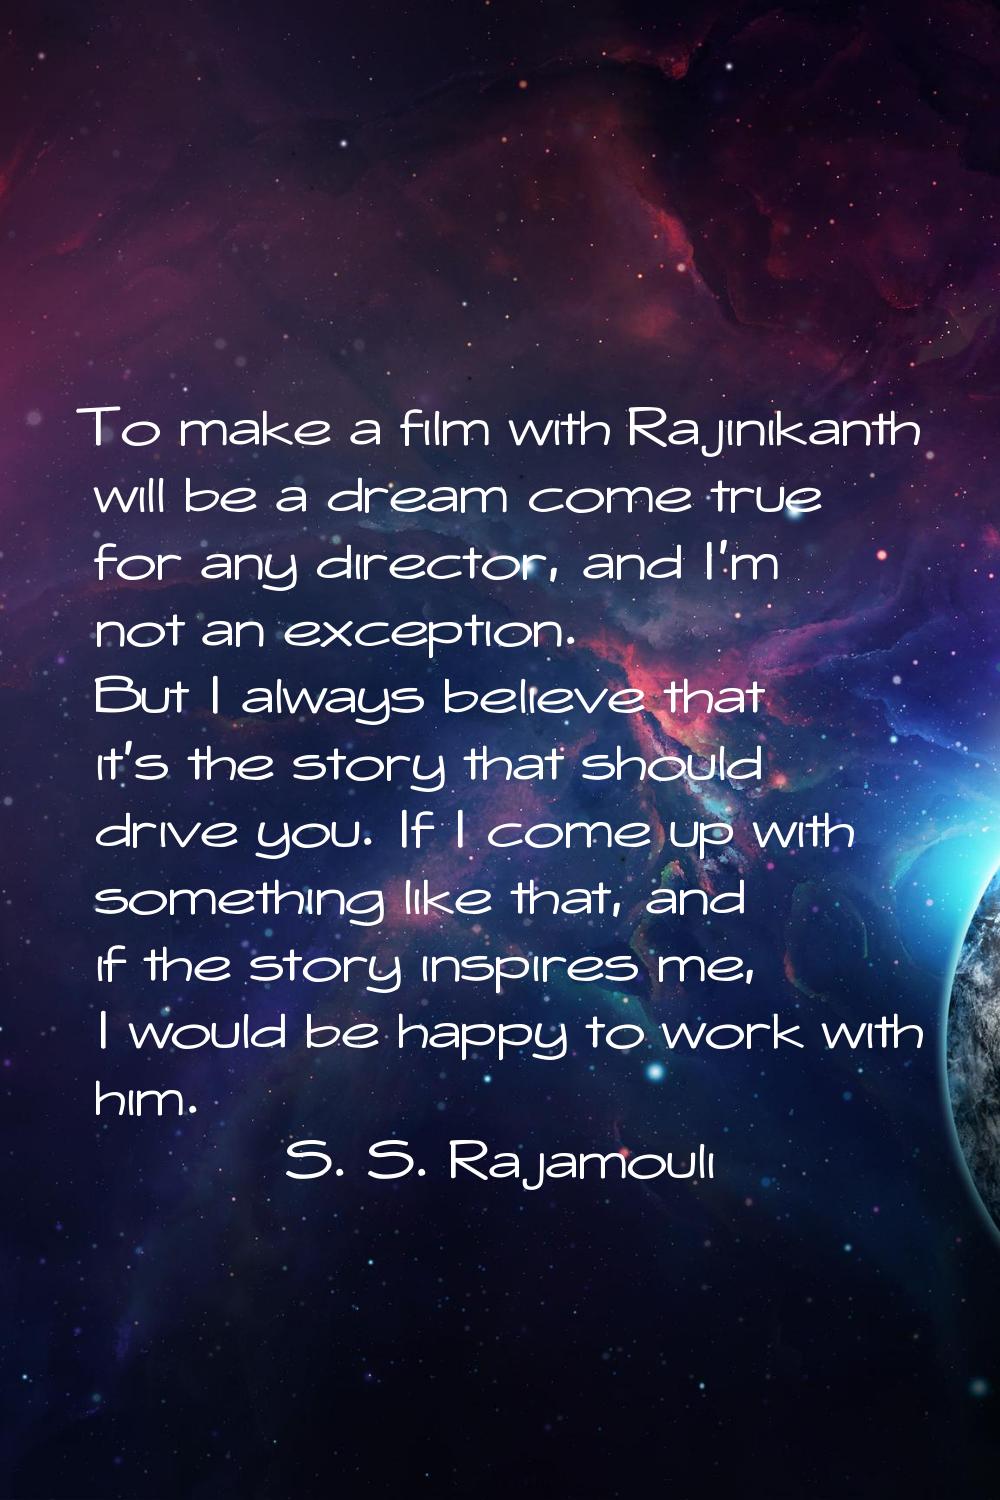 To make a film with Rajinikanth will be a dream come true for any director, and I'm not an exceptio